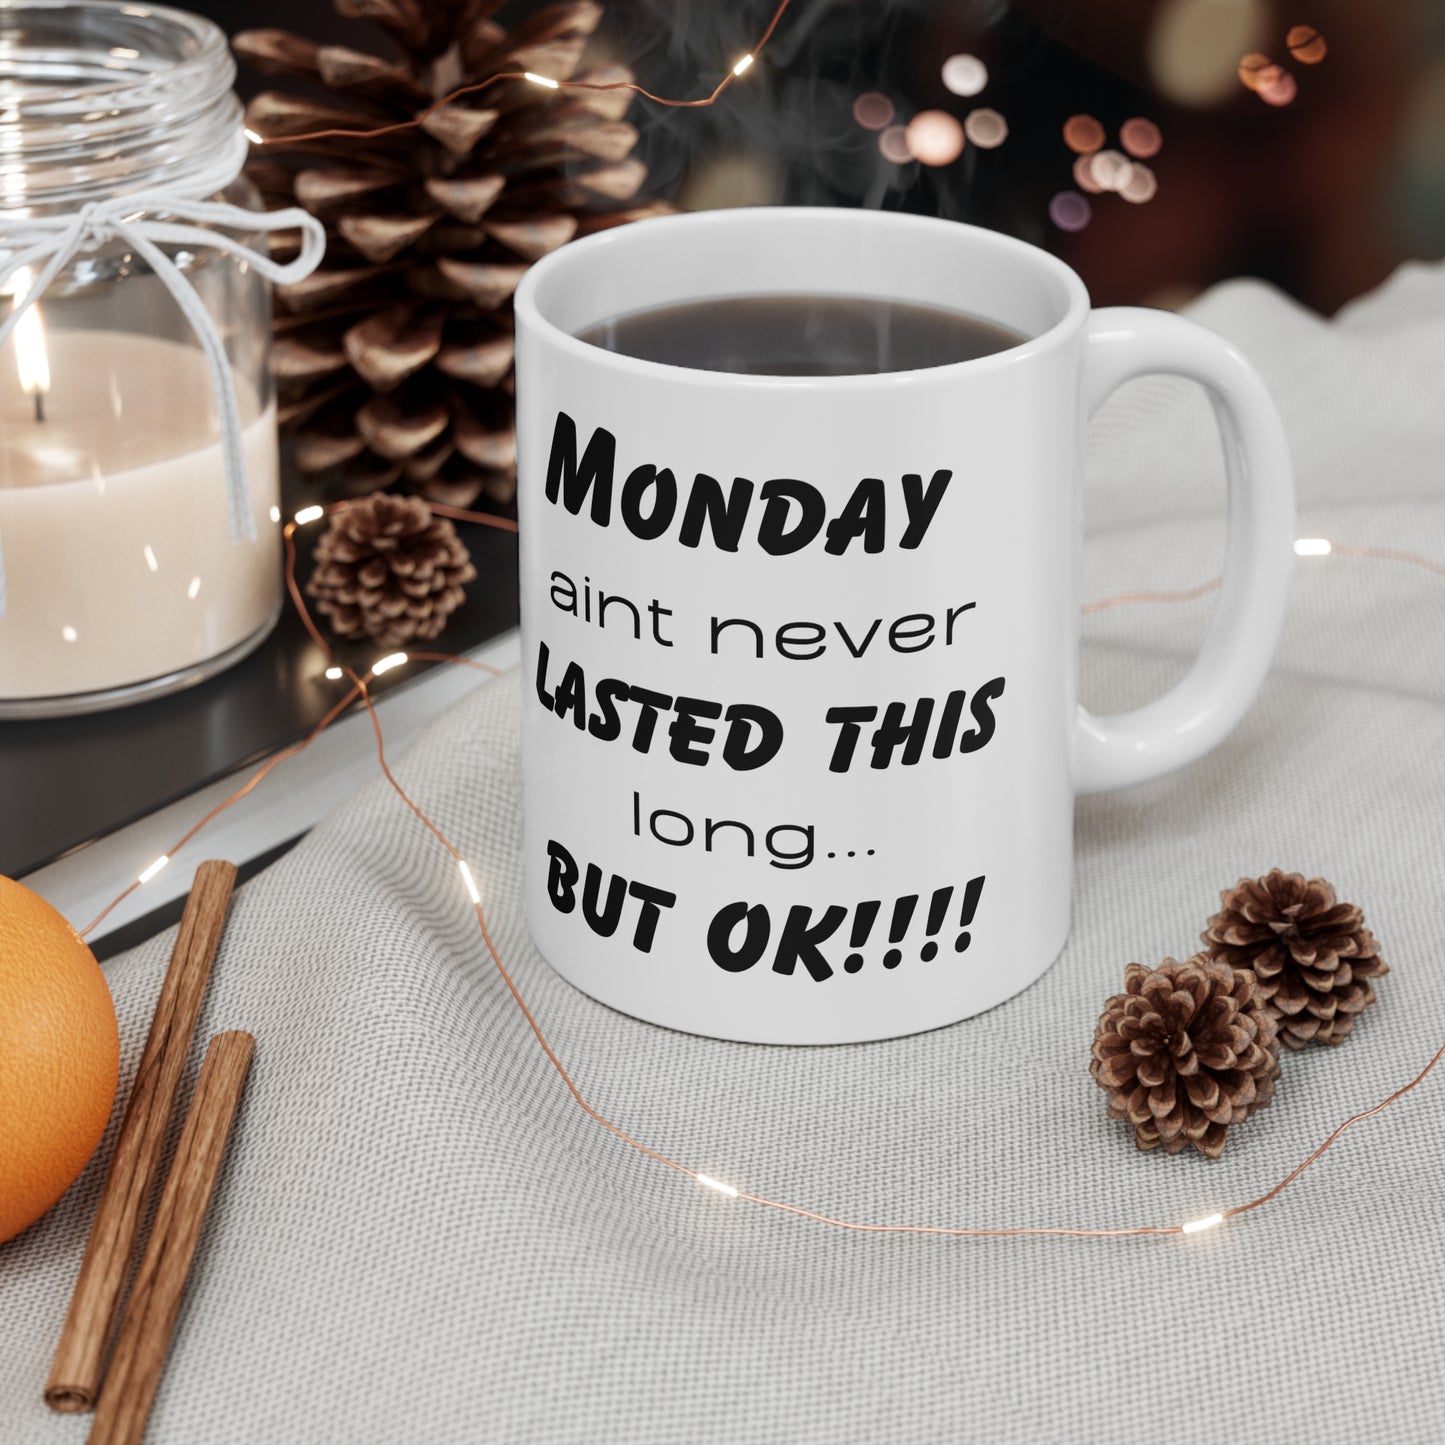 Monday ain't never this long ...but ok! Ceramic Coffee Cups, 11oz, 15oz